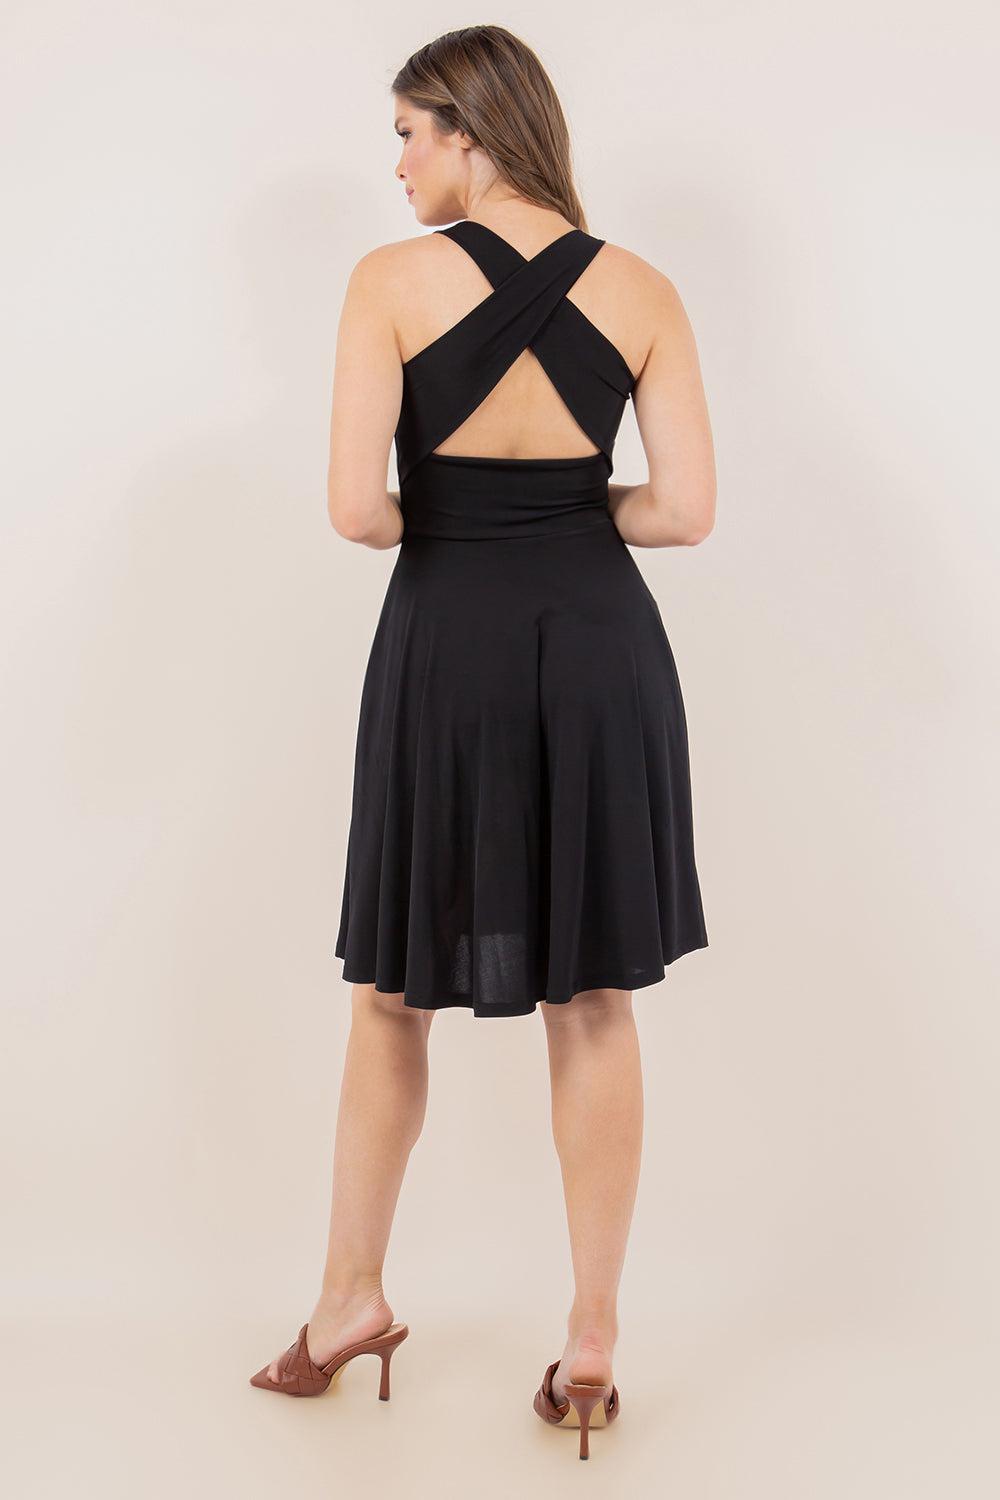 "Darby" Criss Cross Back Dress with Built in Bra-Lola Monroe Boutique